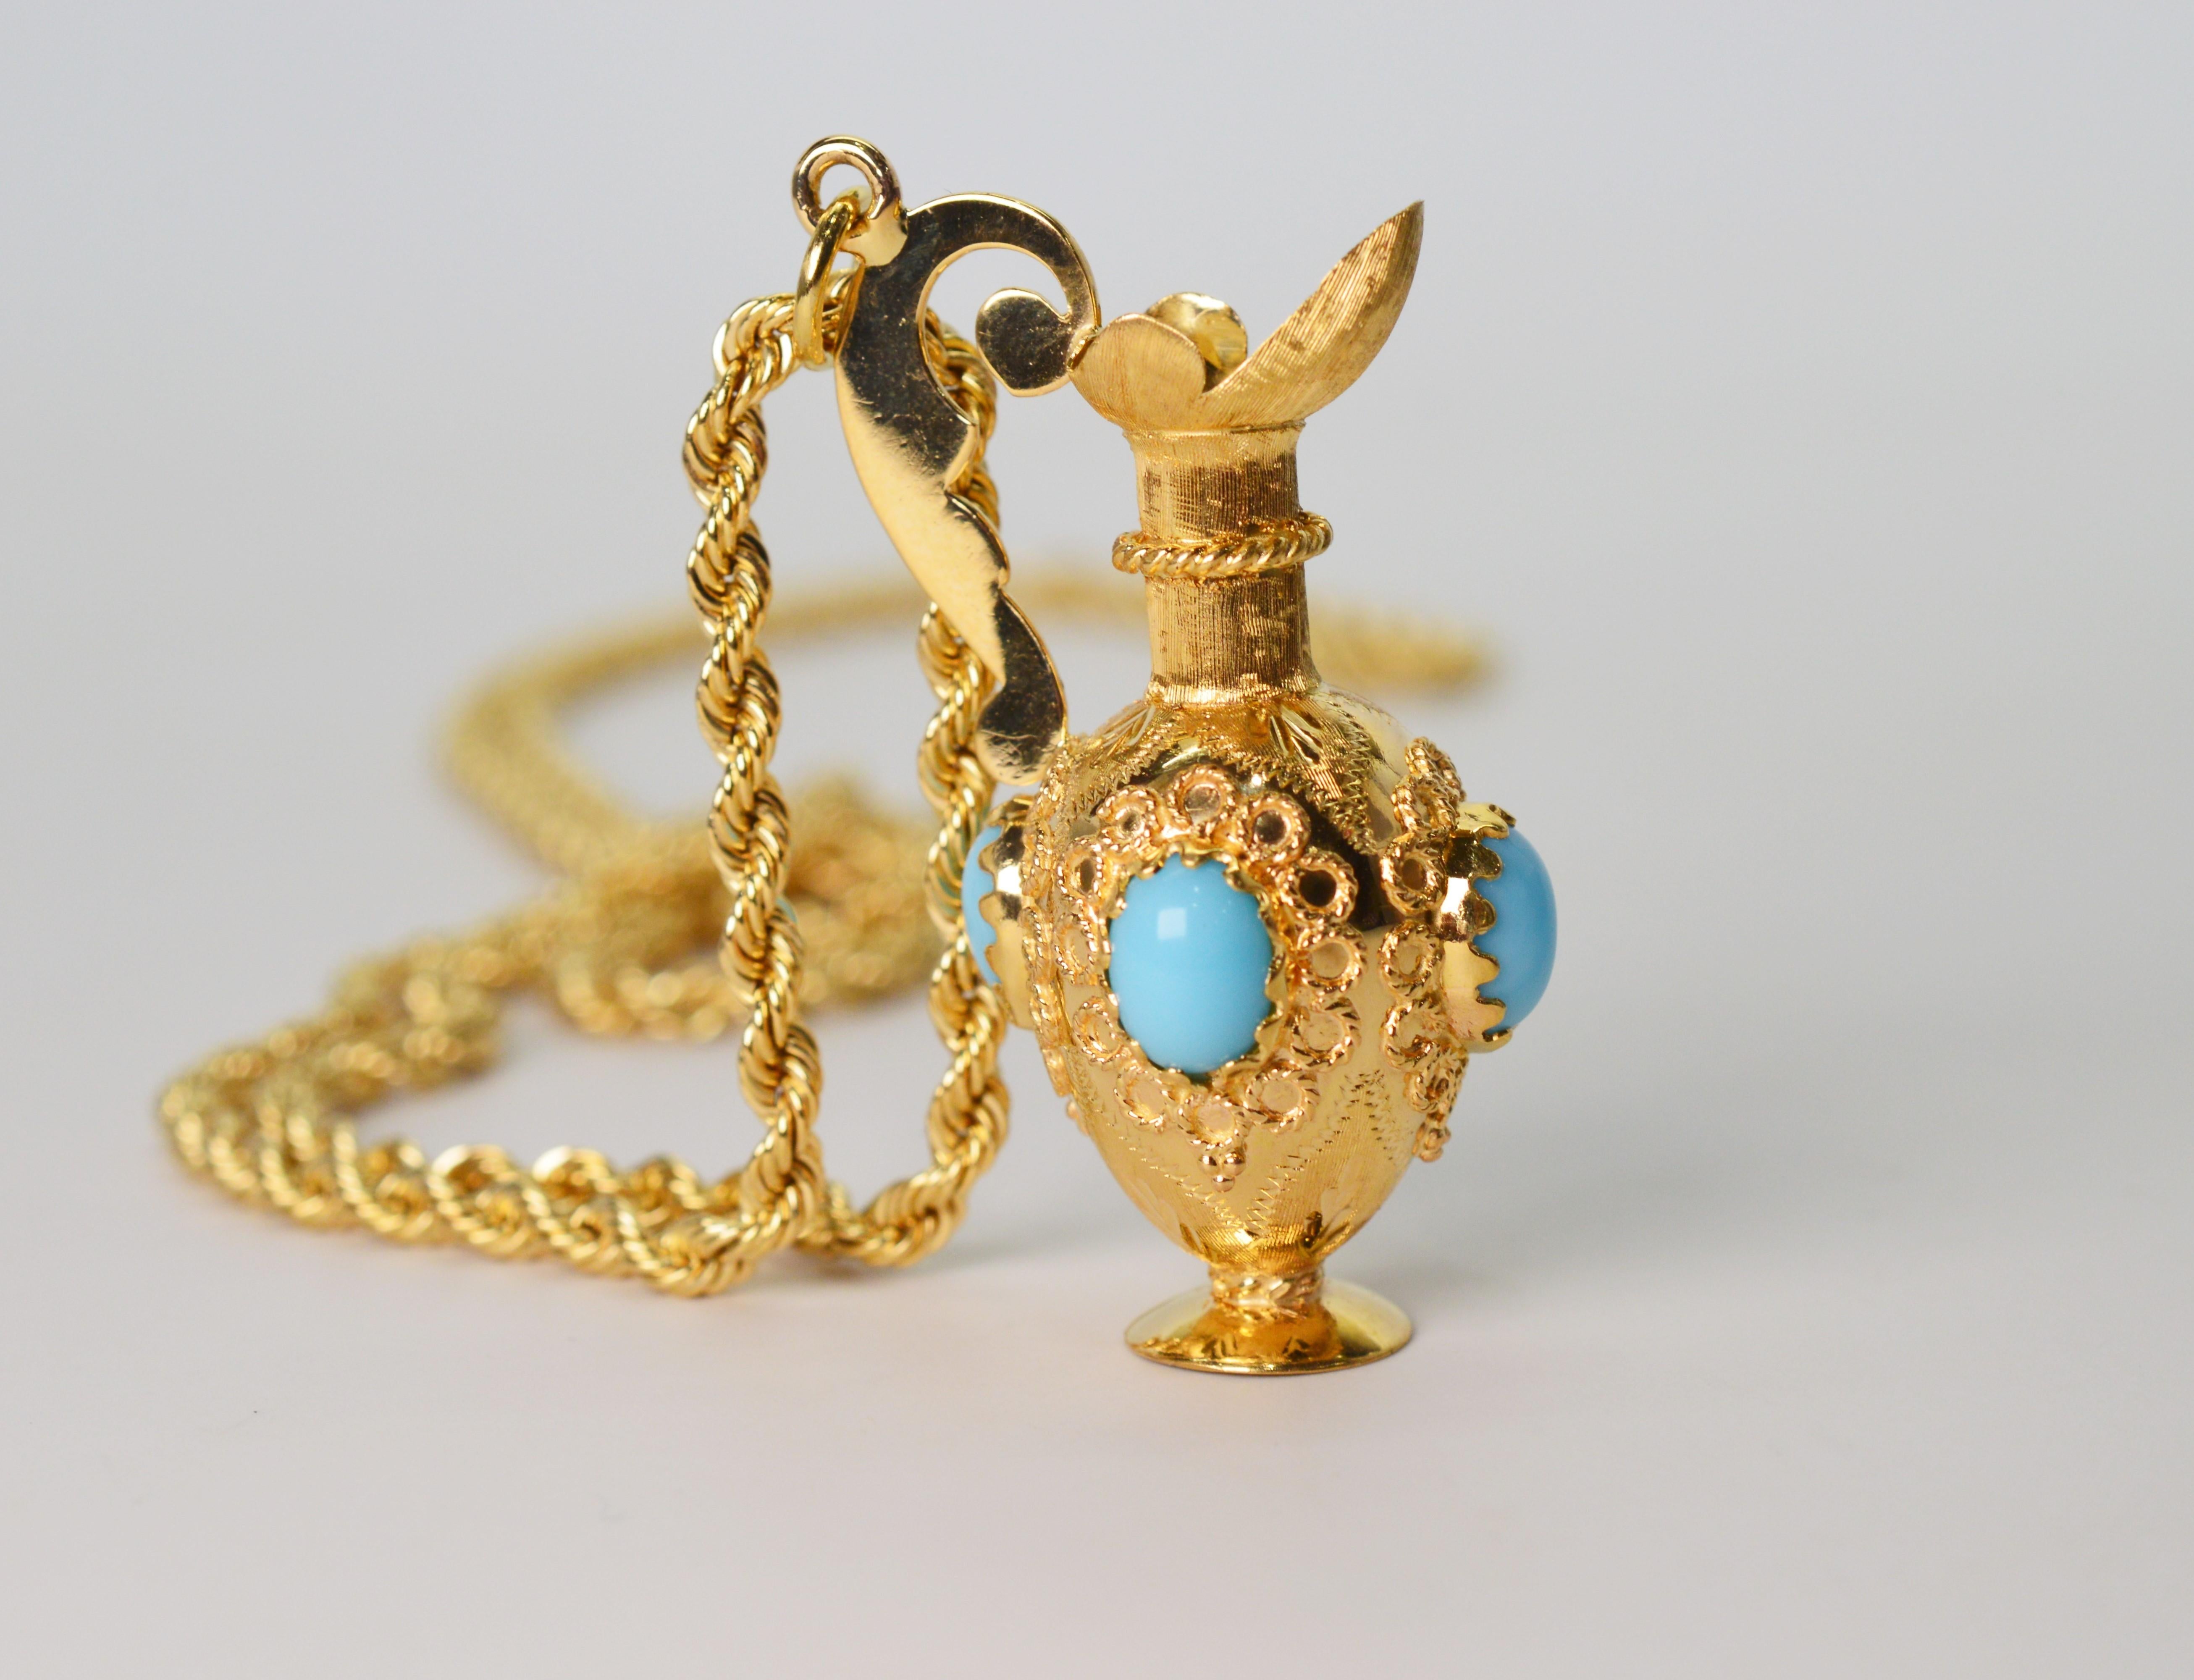 Eye catching and distinctive, this unique and ornate vessel charm is made of brilliant eighteen carat 18K yellow gold and is bejeweled with turquoise cabochon stones. As a pendant, circa 1960, it rests on a substantial and bright 2.5 mm fourteen